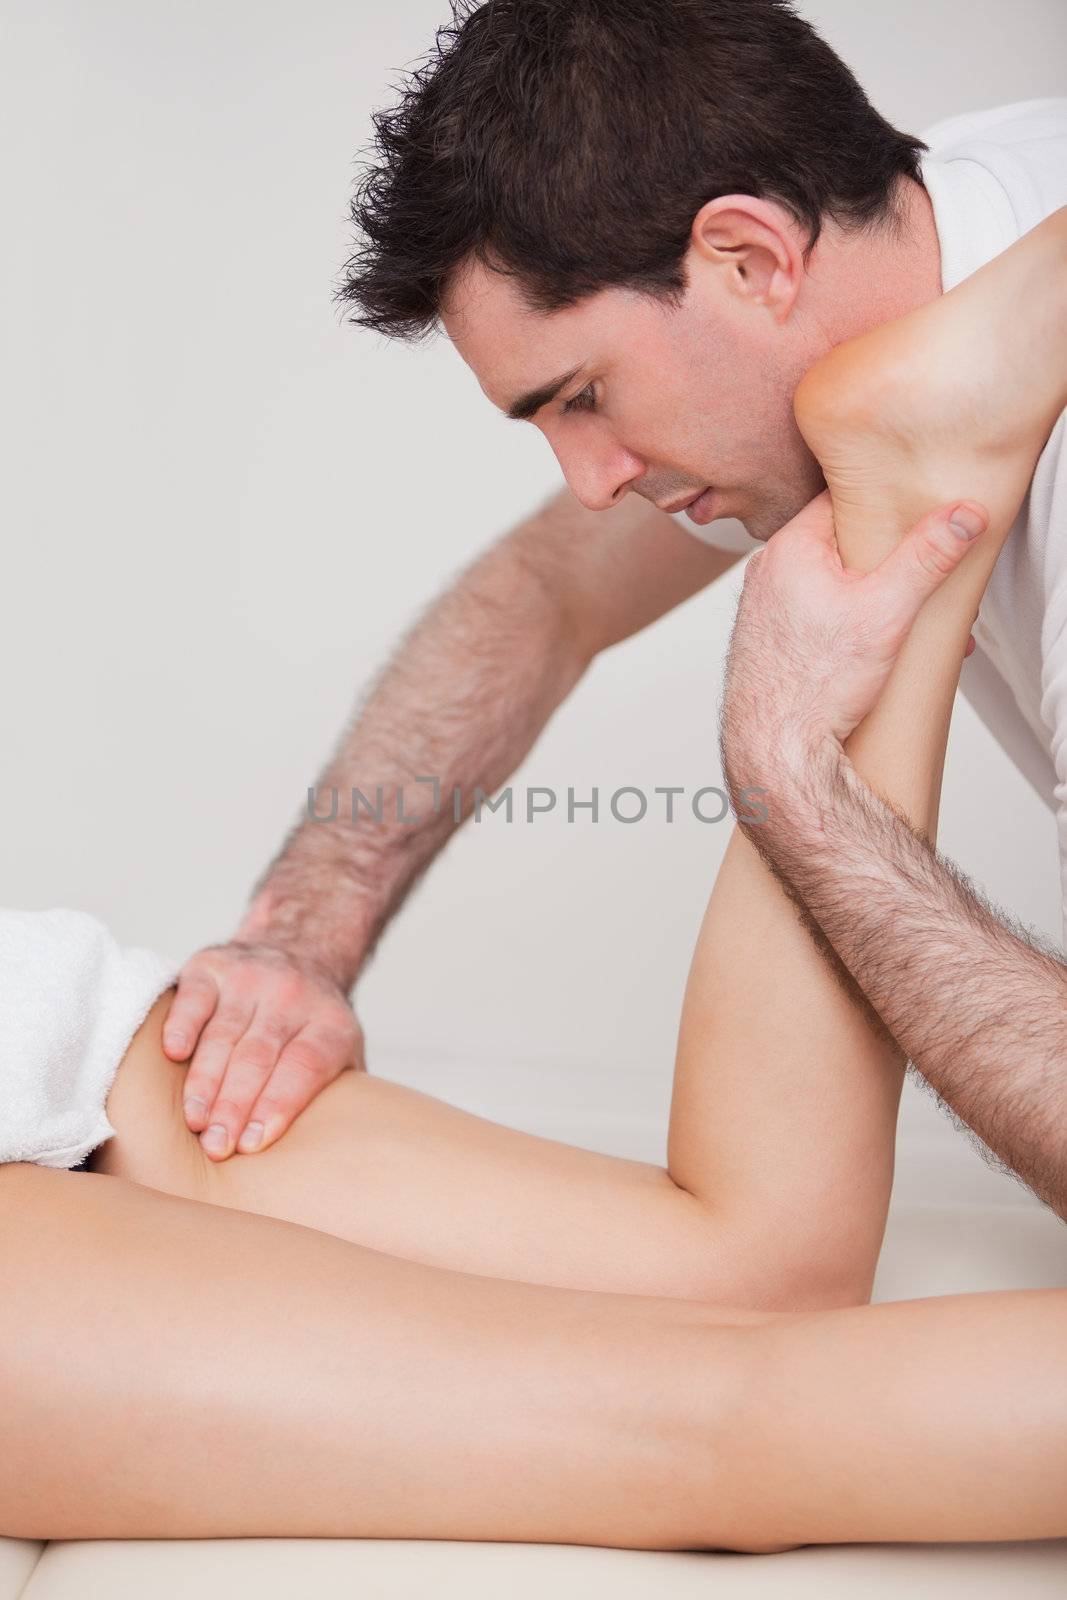 Chiropractor manipulating the leg of his patient while folding it in a room